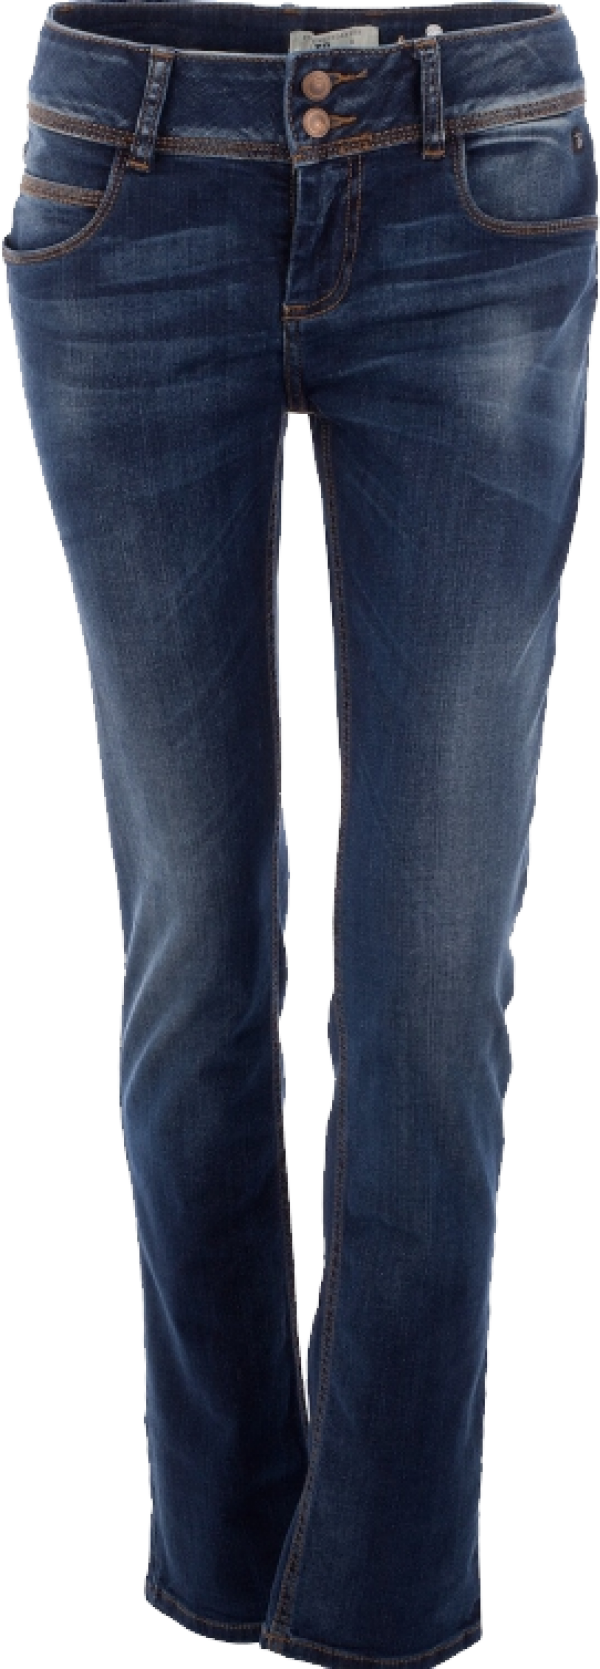 Jeans PNG Free Download 21